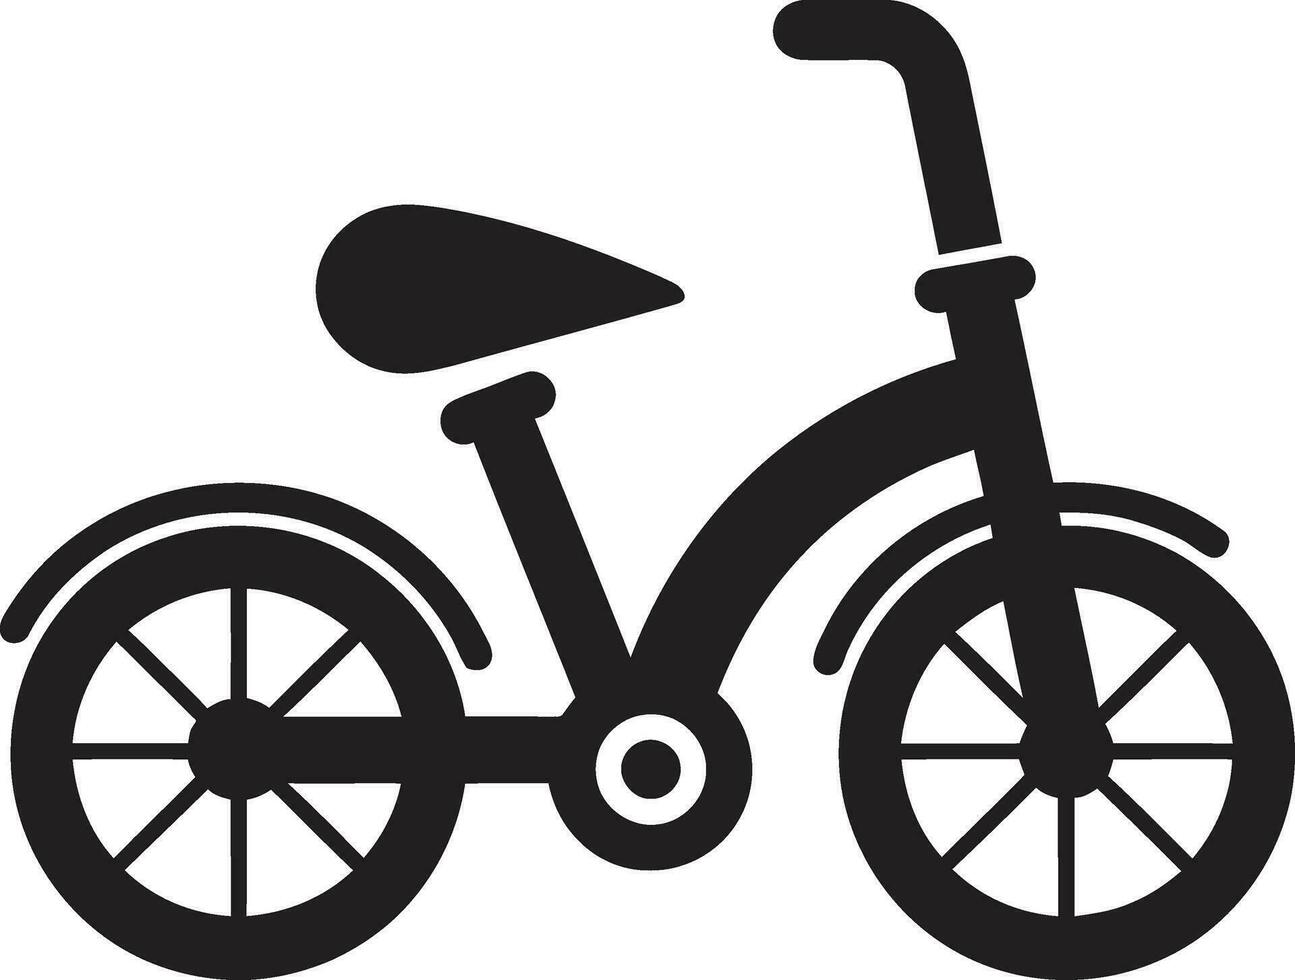 Pedal Power in Vectors Bicycle Illustration Collection Cycling Through Creativity Vectorized Bikes